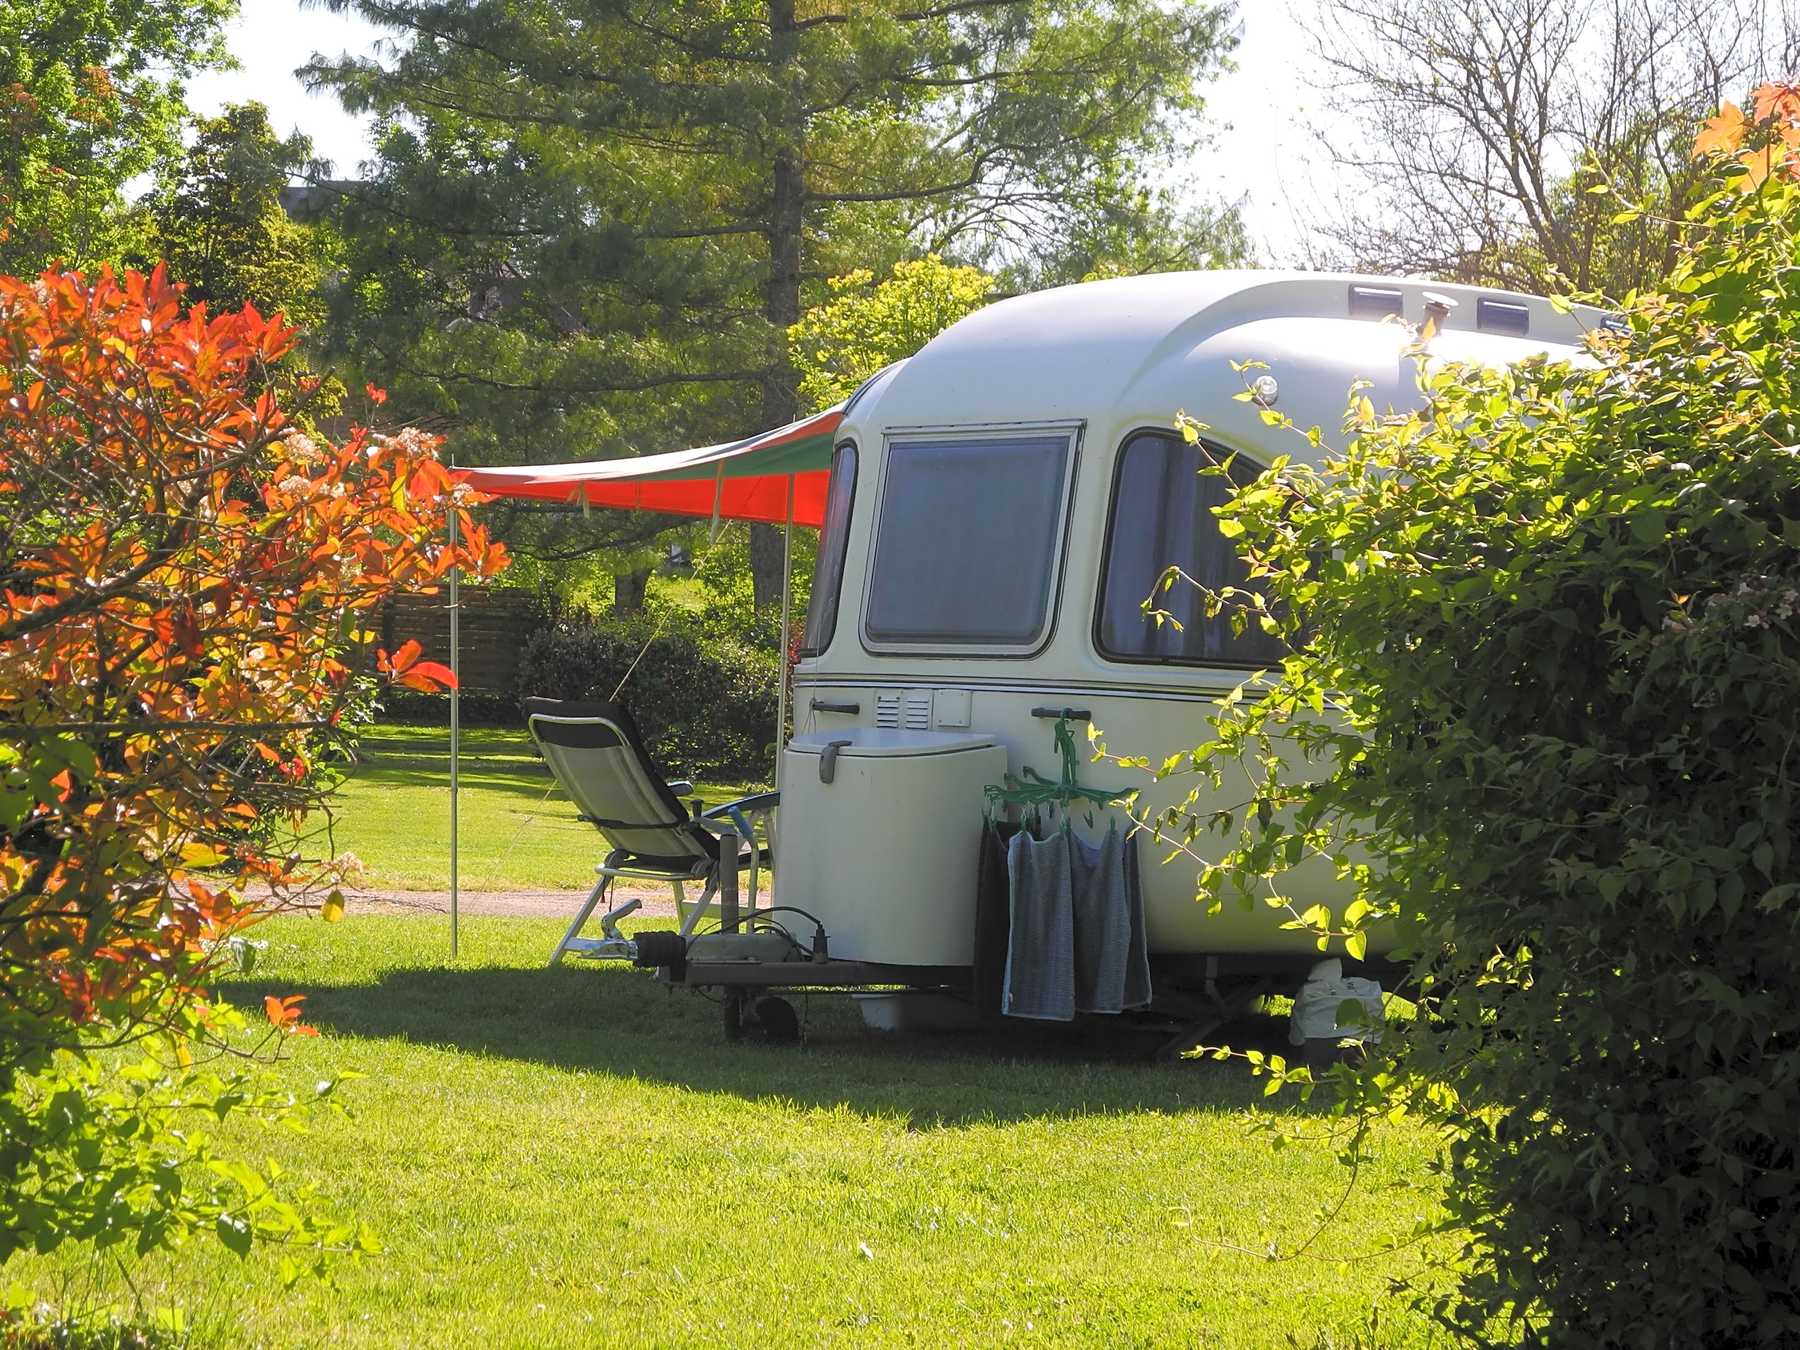 A touring caravan holiday is well worth trying at least once in life